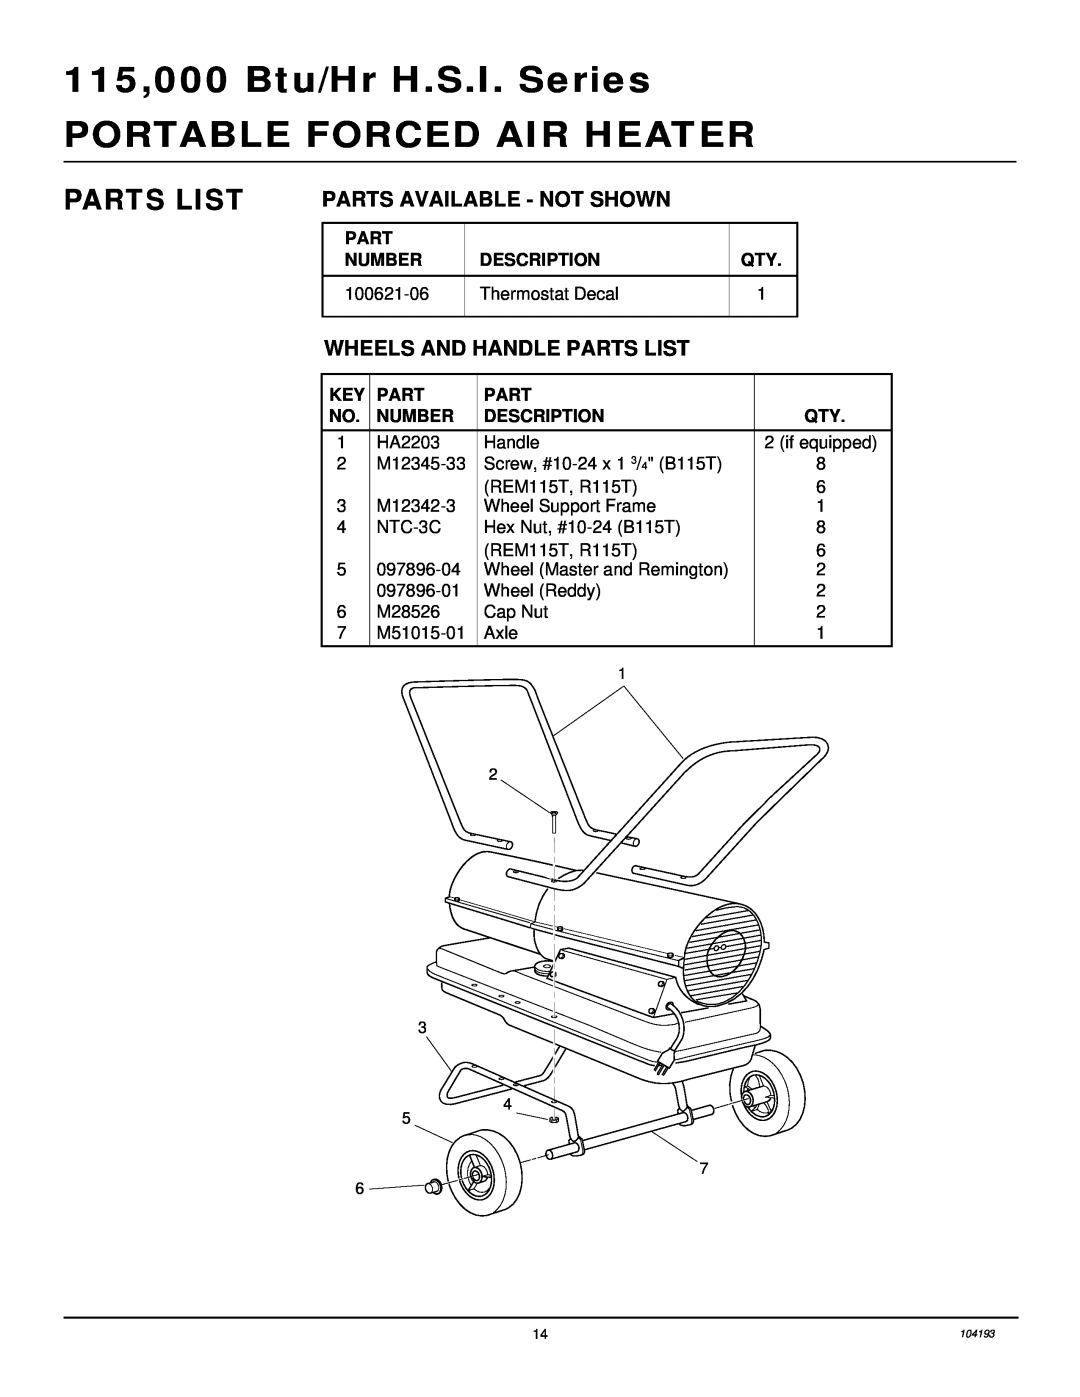 Desa B115T Parts Available - Not Shown, Wheels And Handle Parts List, Number, Description, 100621-06, Thermostat Decal 